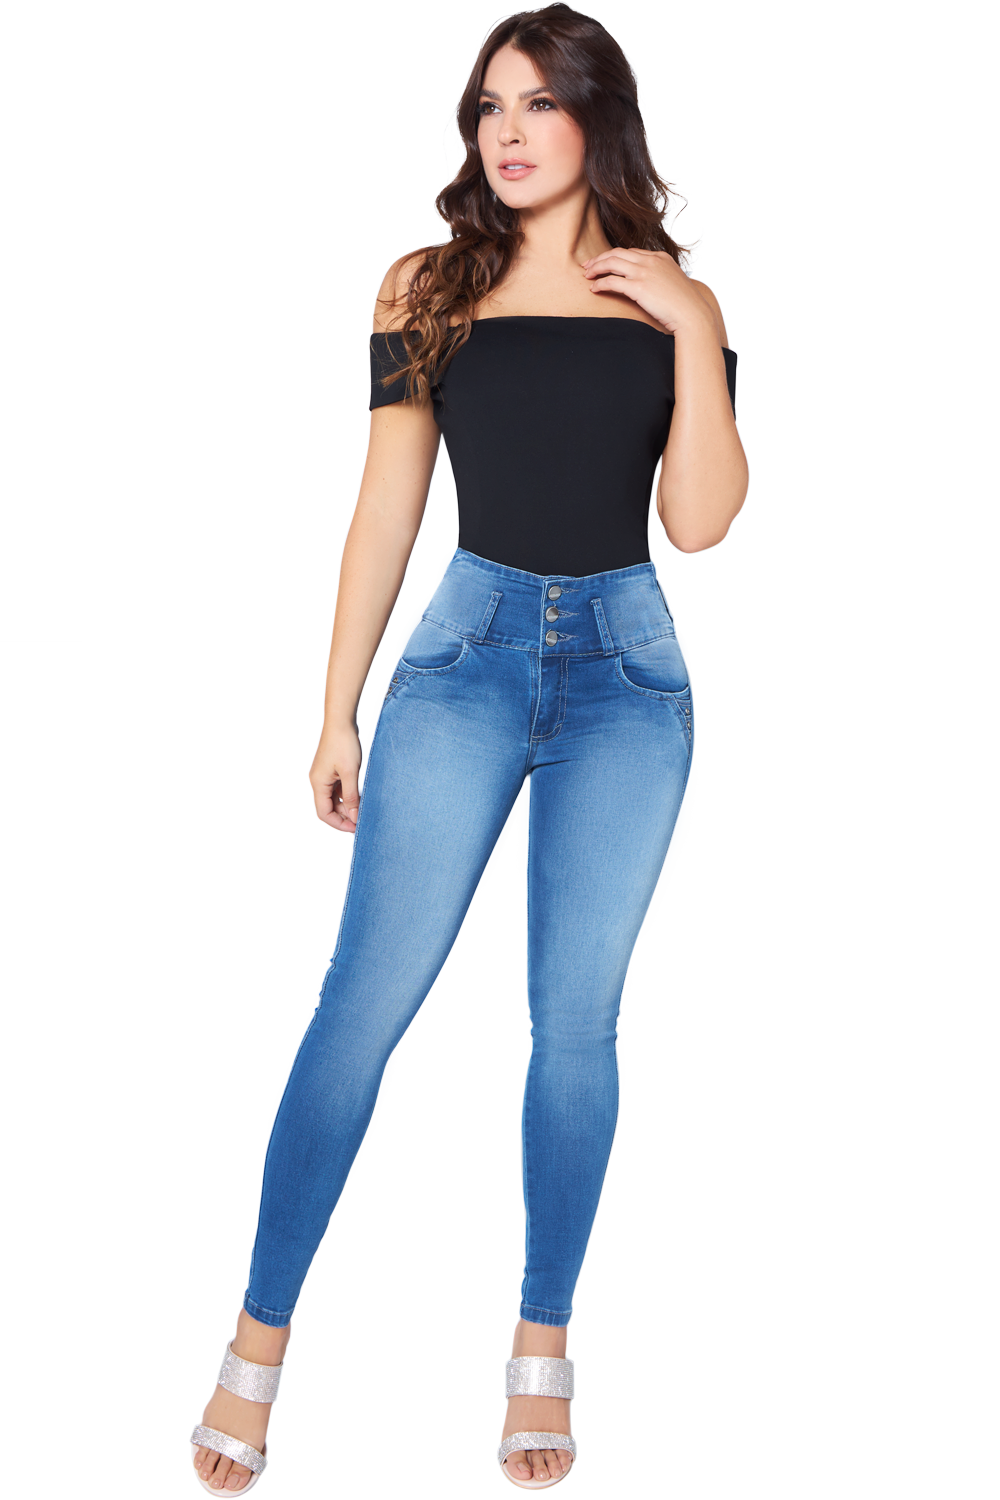 Jackie London Jeans 2202 - High Rise Skinny Push-Up Distressed Jeans